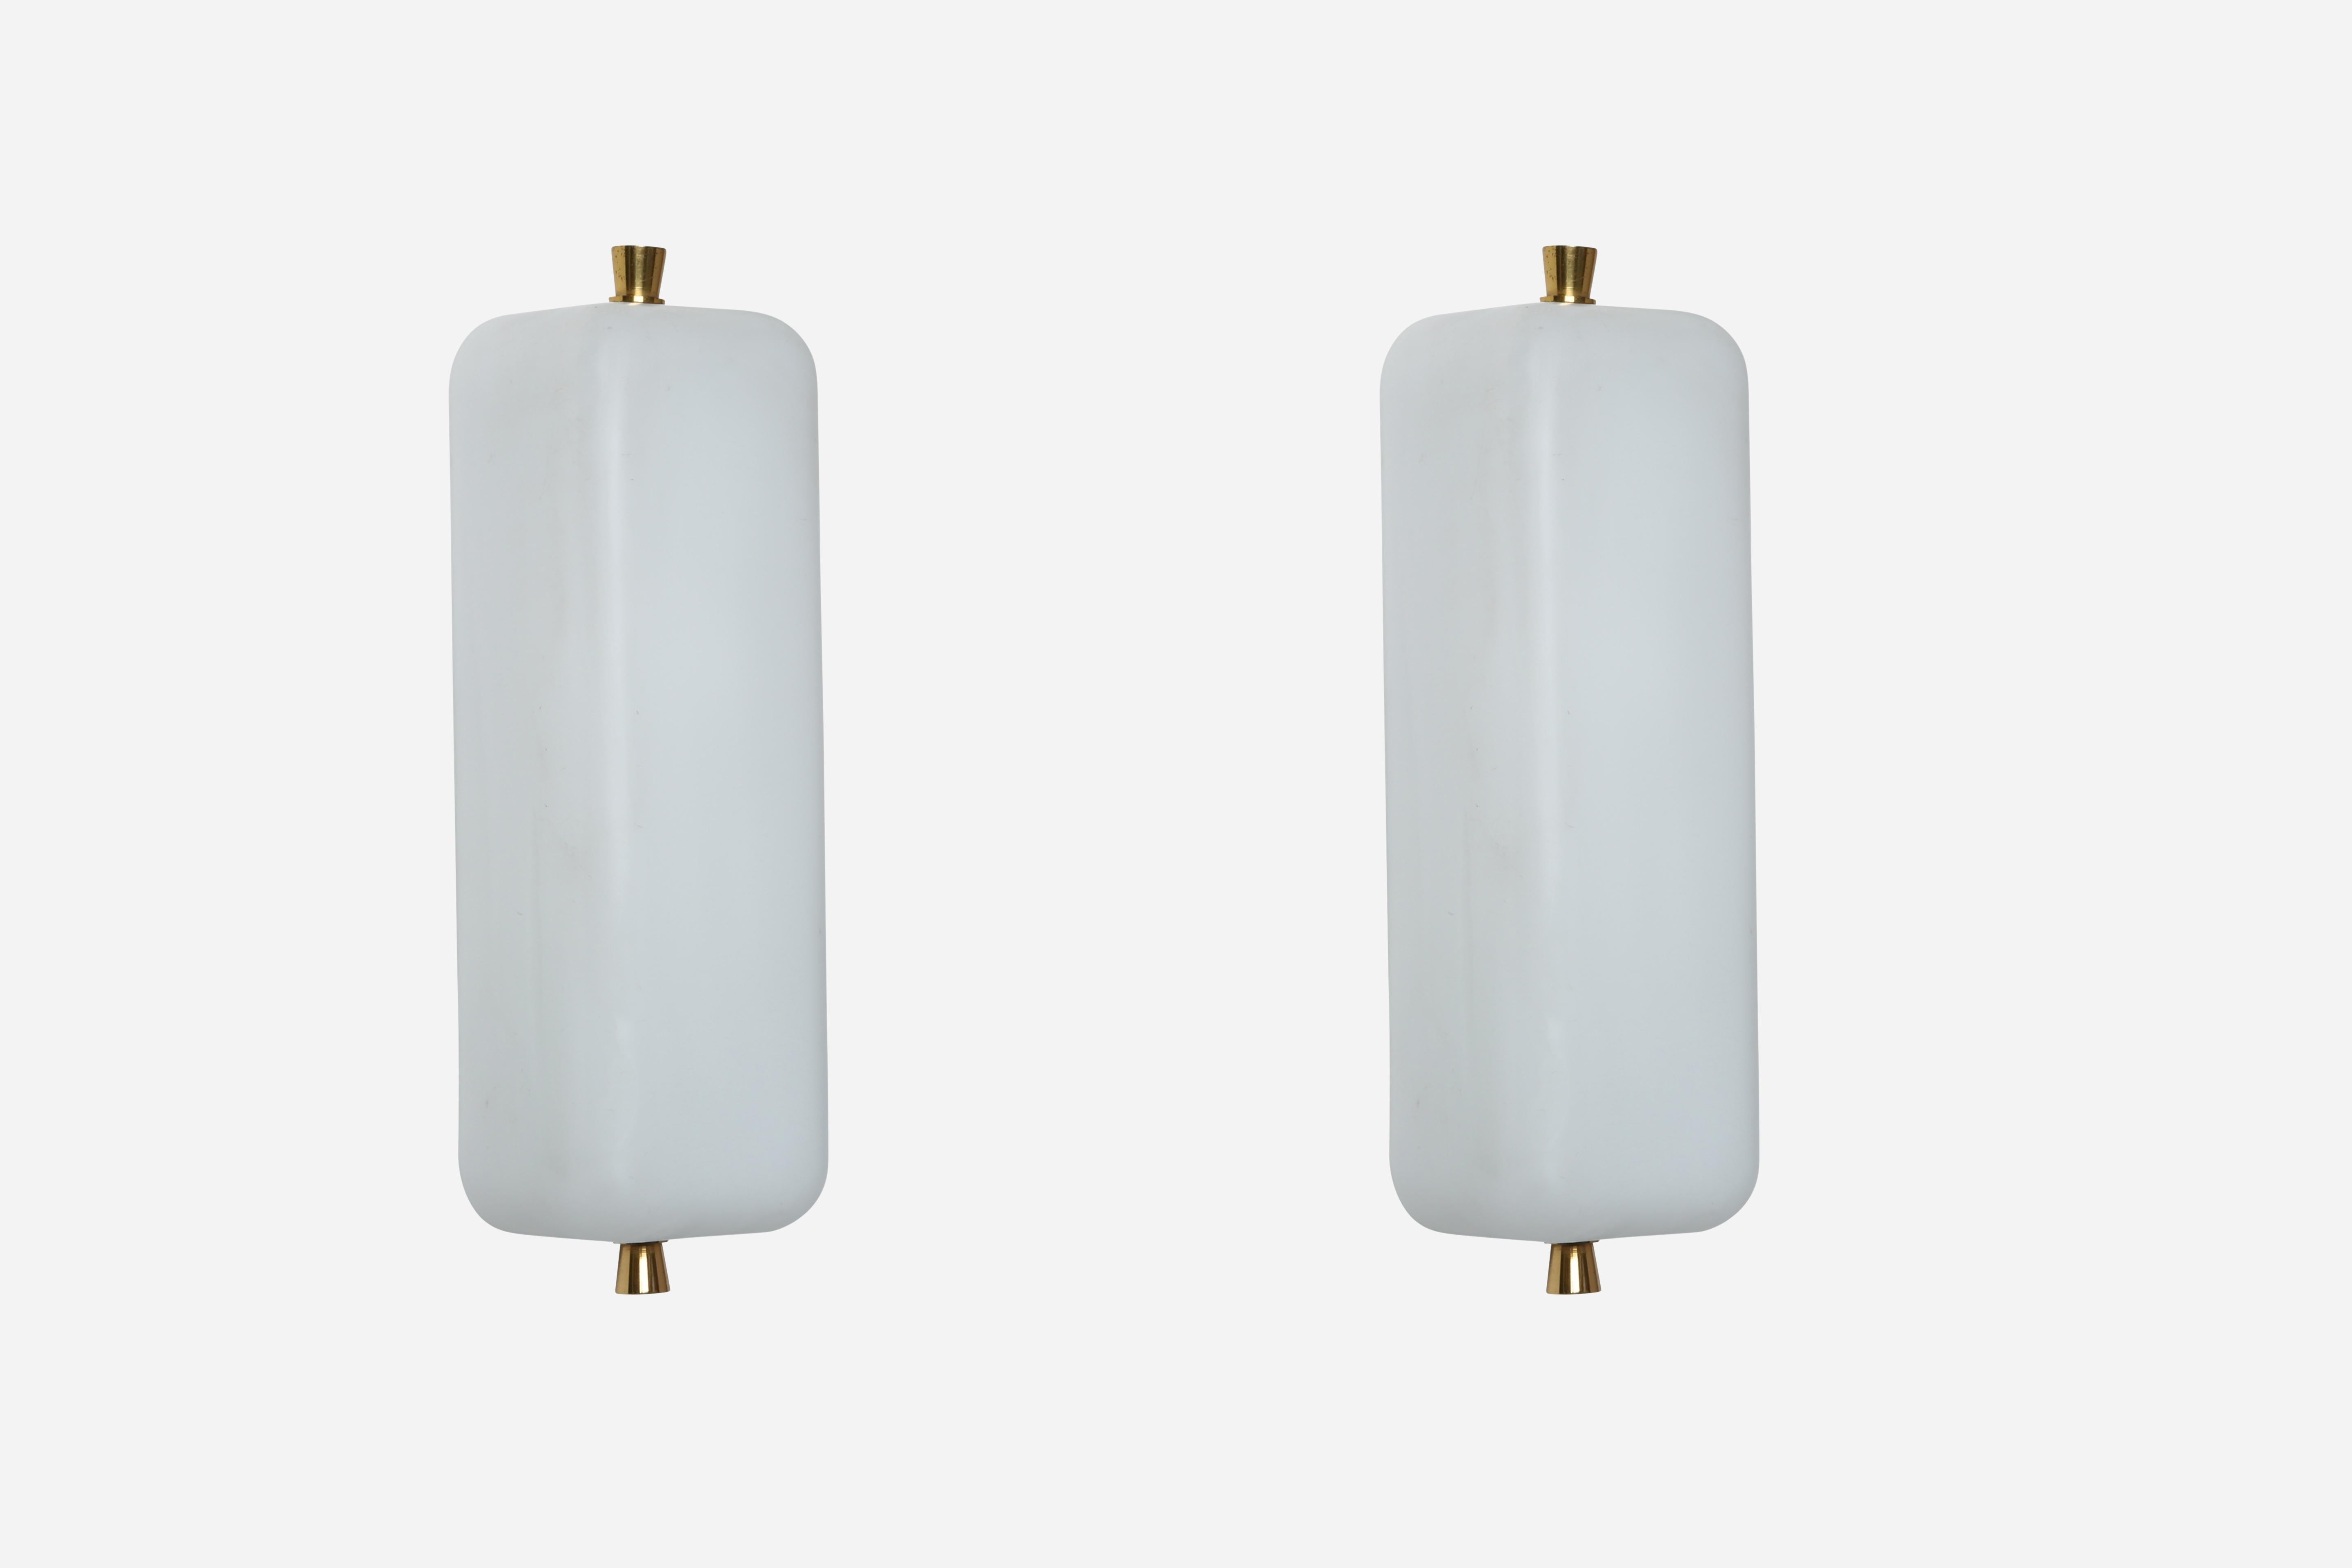 Stilnovo style Italian sconces, a pair
Made in Italy in 1960s
Opaline glass, brass, enameled metal
Take 2 candelabra bulbs each.
Rewired for US.
Priced and sold as a pair.